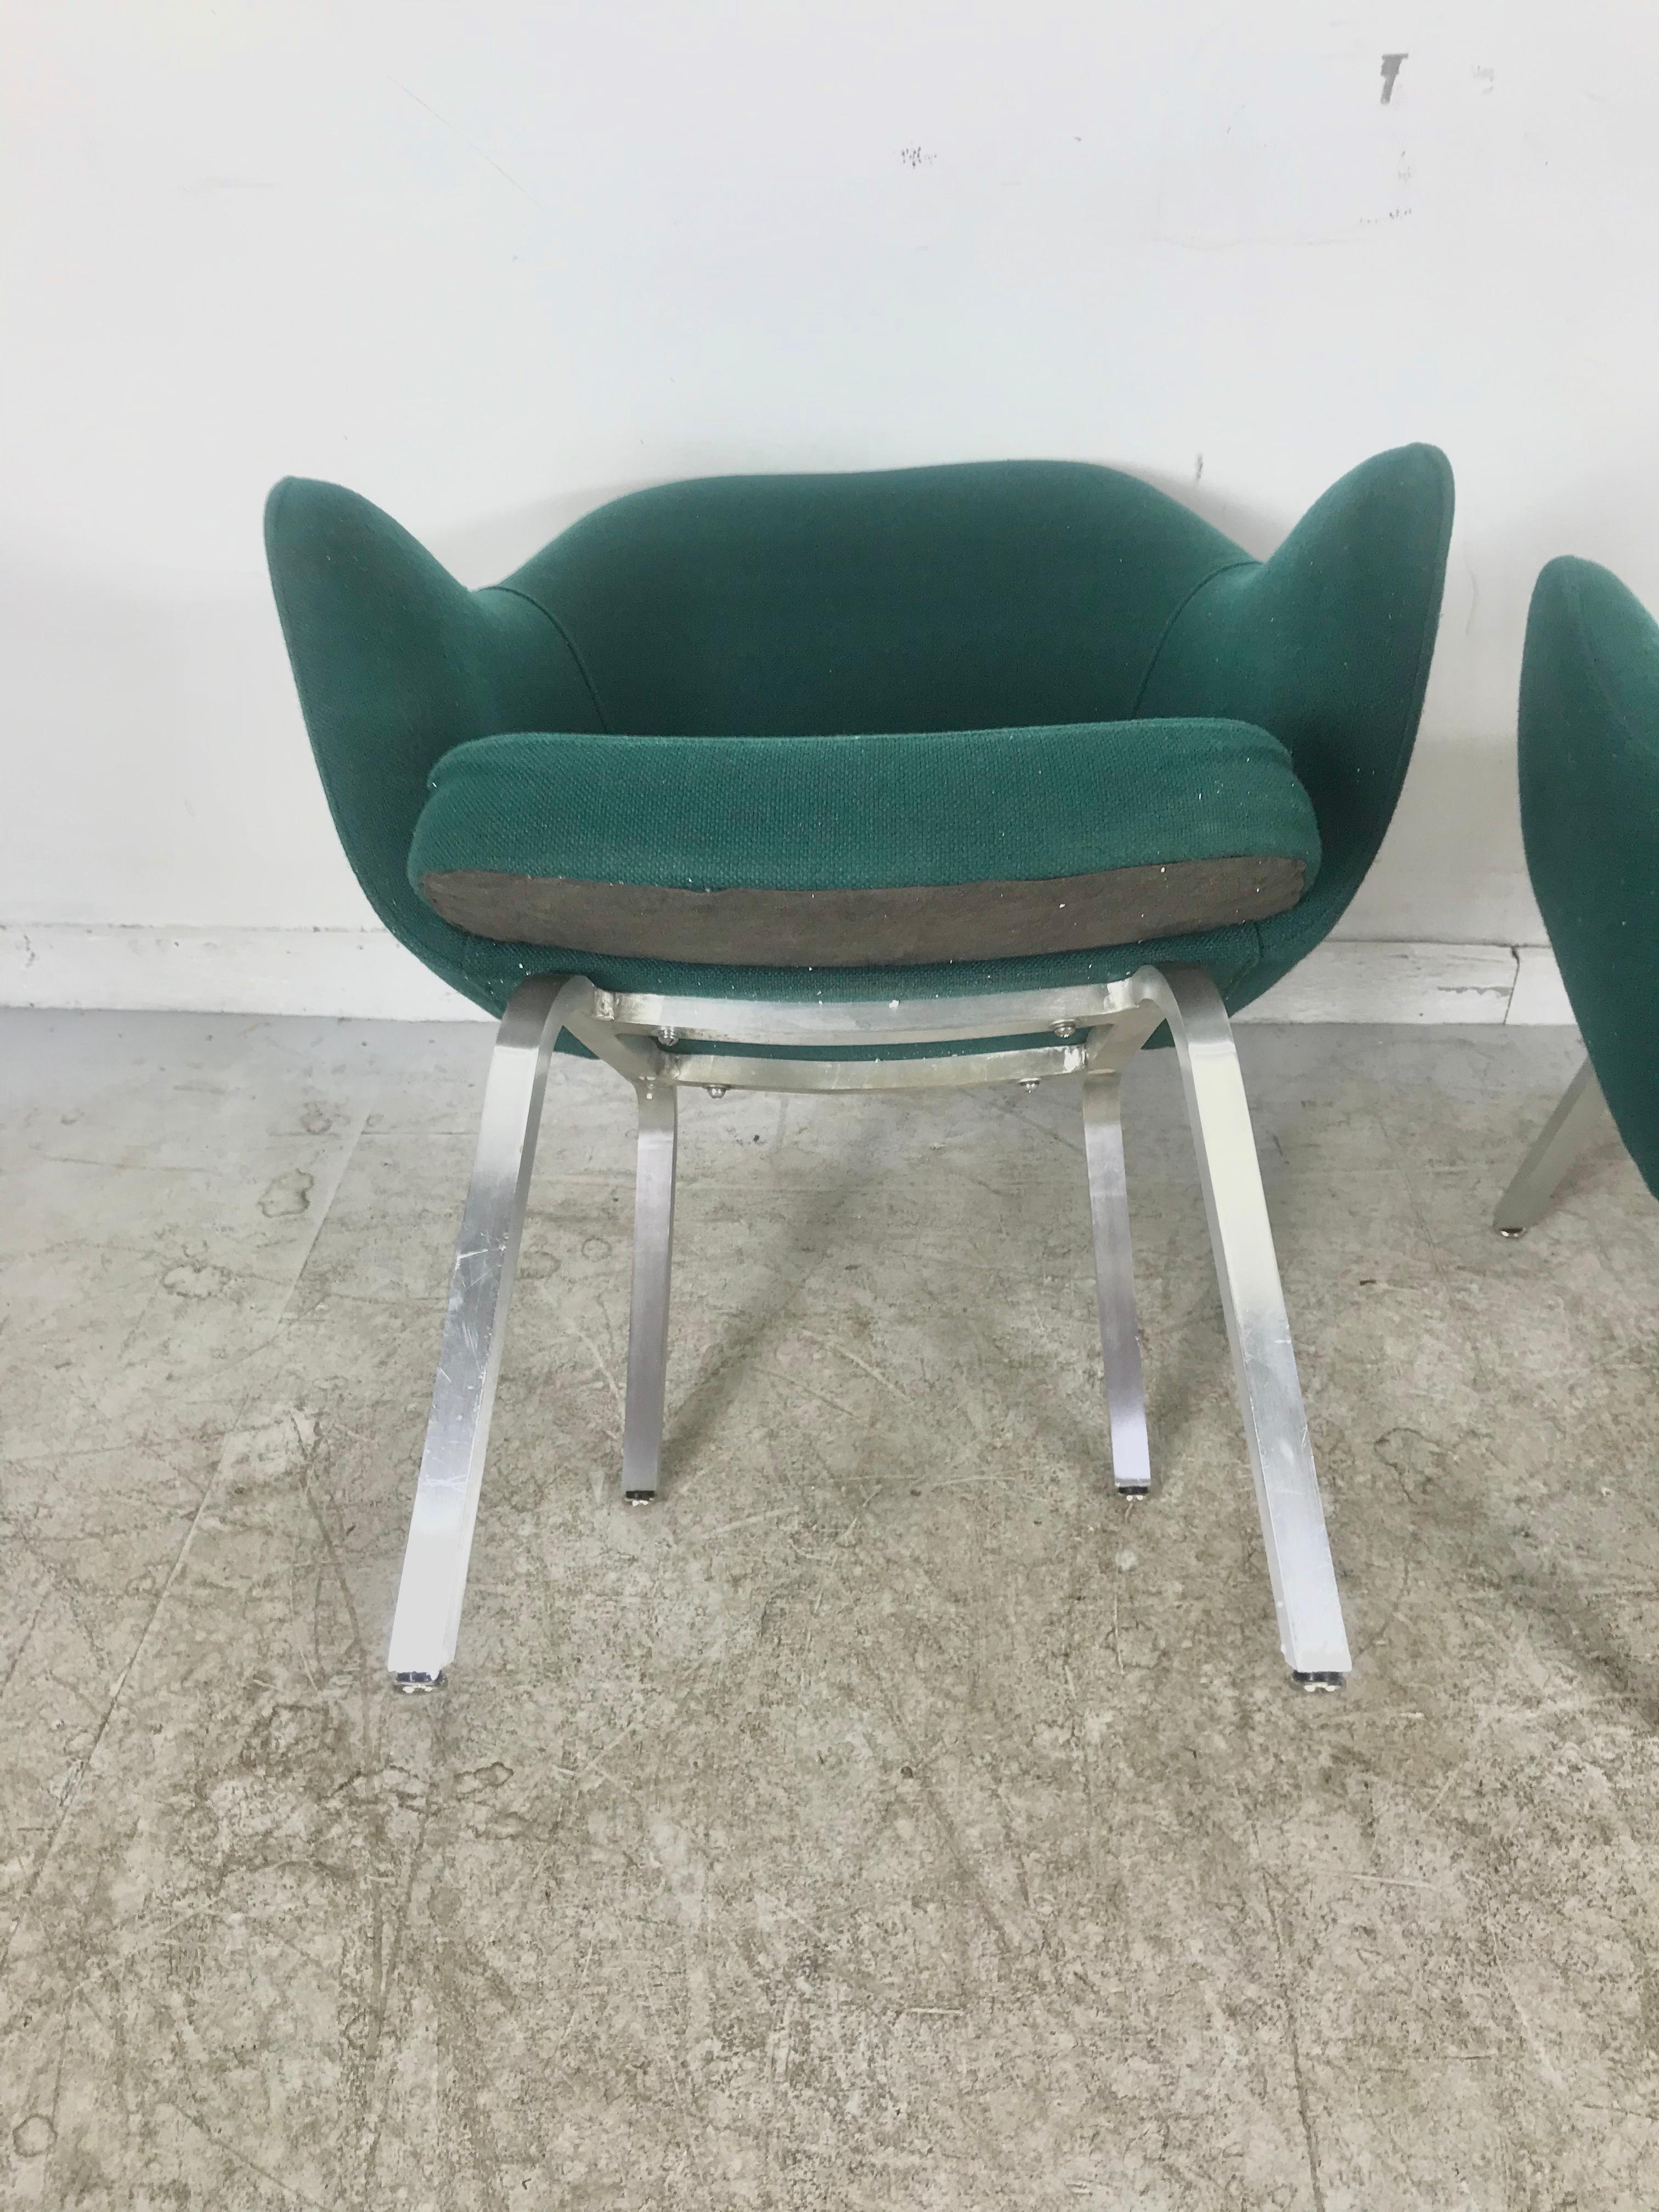 Designed for one year in very limited production run, executive lounge armchairs designed by Eero Saarinen for Knoll, unusual square stock aluminum bases, slightly lower back legs make these extremely comfortable, perfect position, retain original